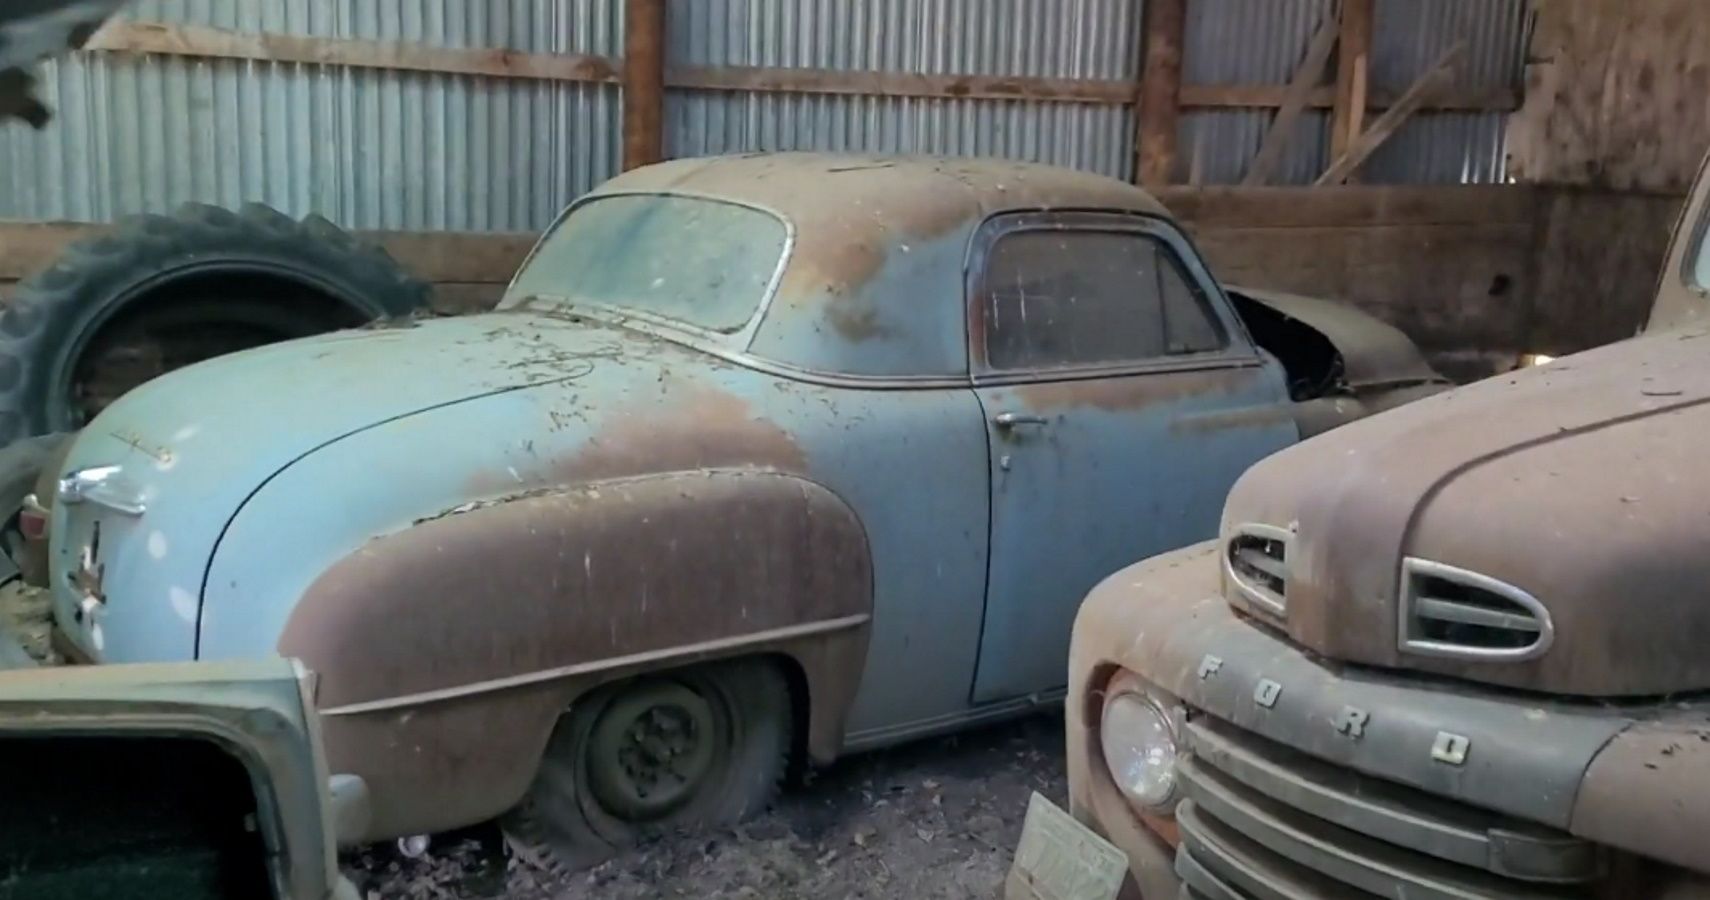 Check Out This North Dakota Barn Filled With Classic Chevys, Fords, And Plymouths